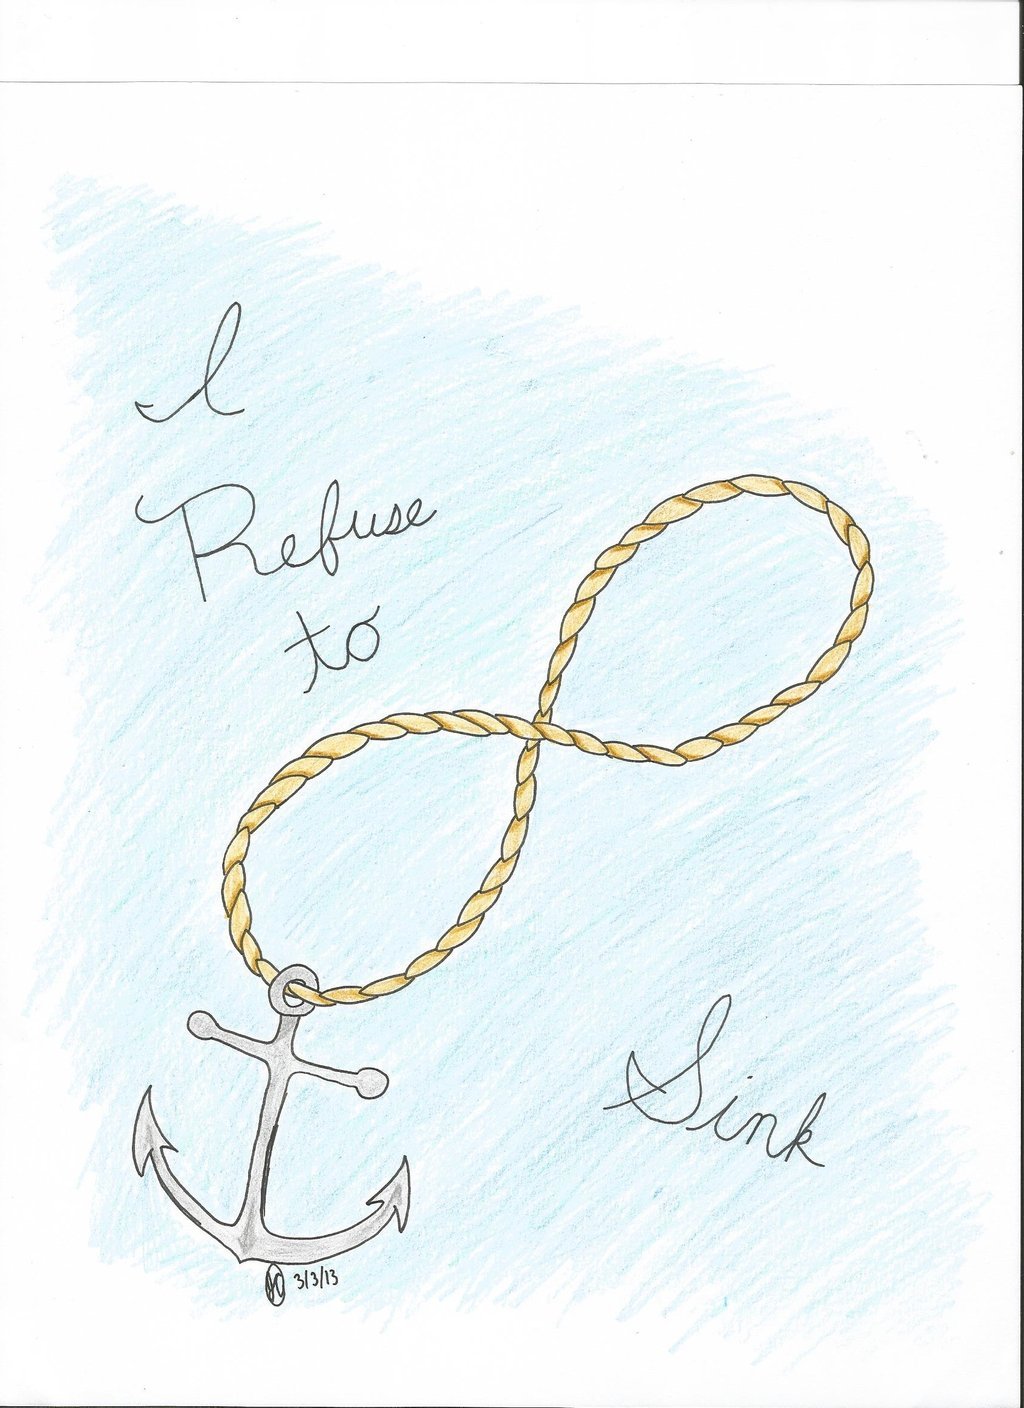 Infinity Symbol With Anchor Wallpaper Images Pictures   Becuo 1024x1408